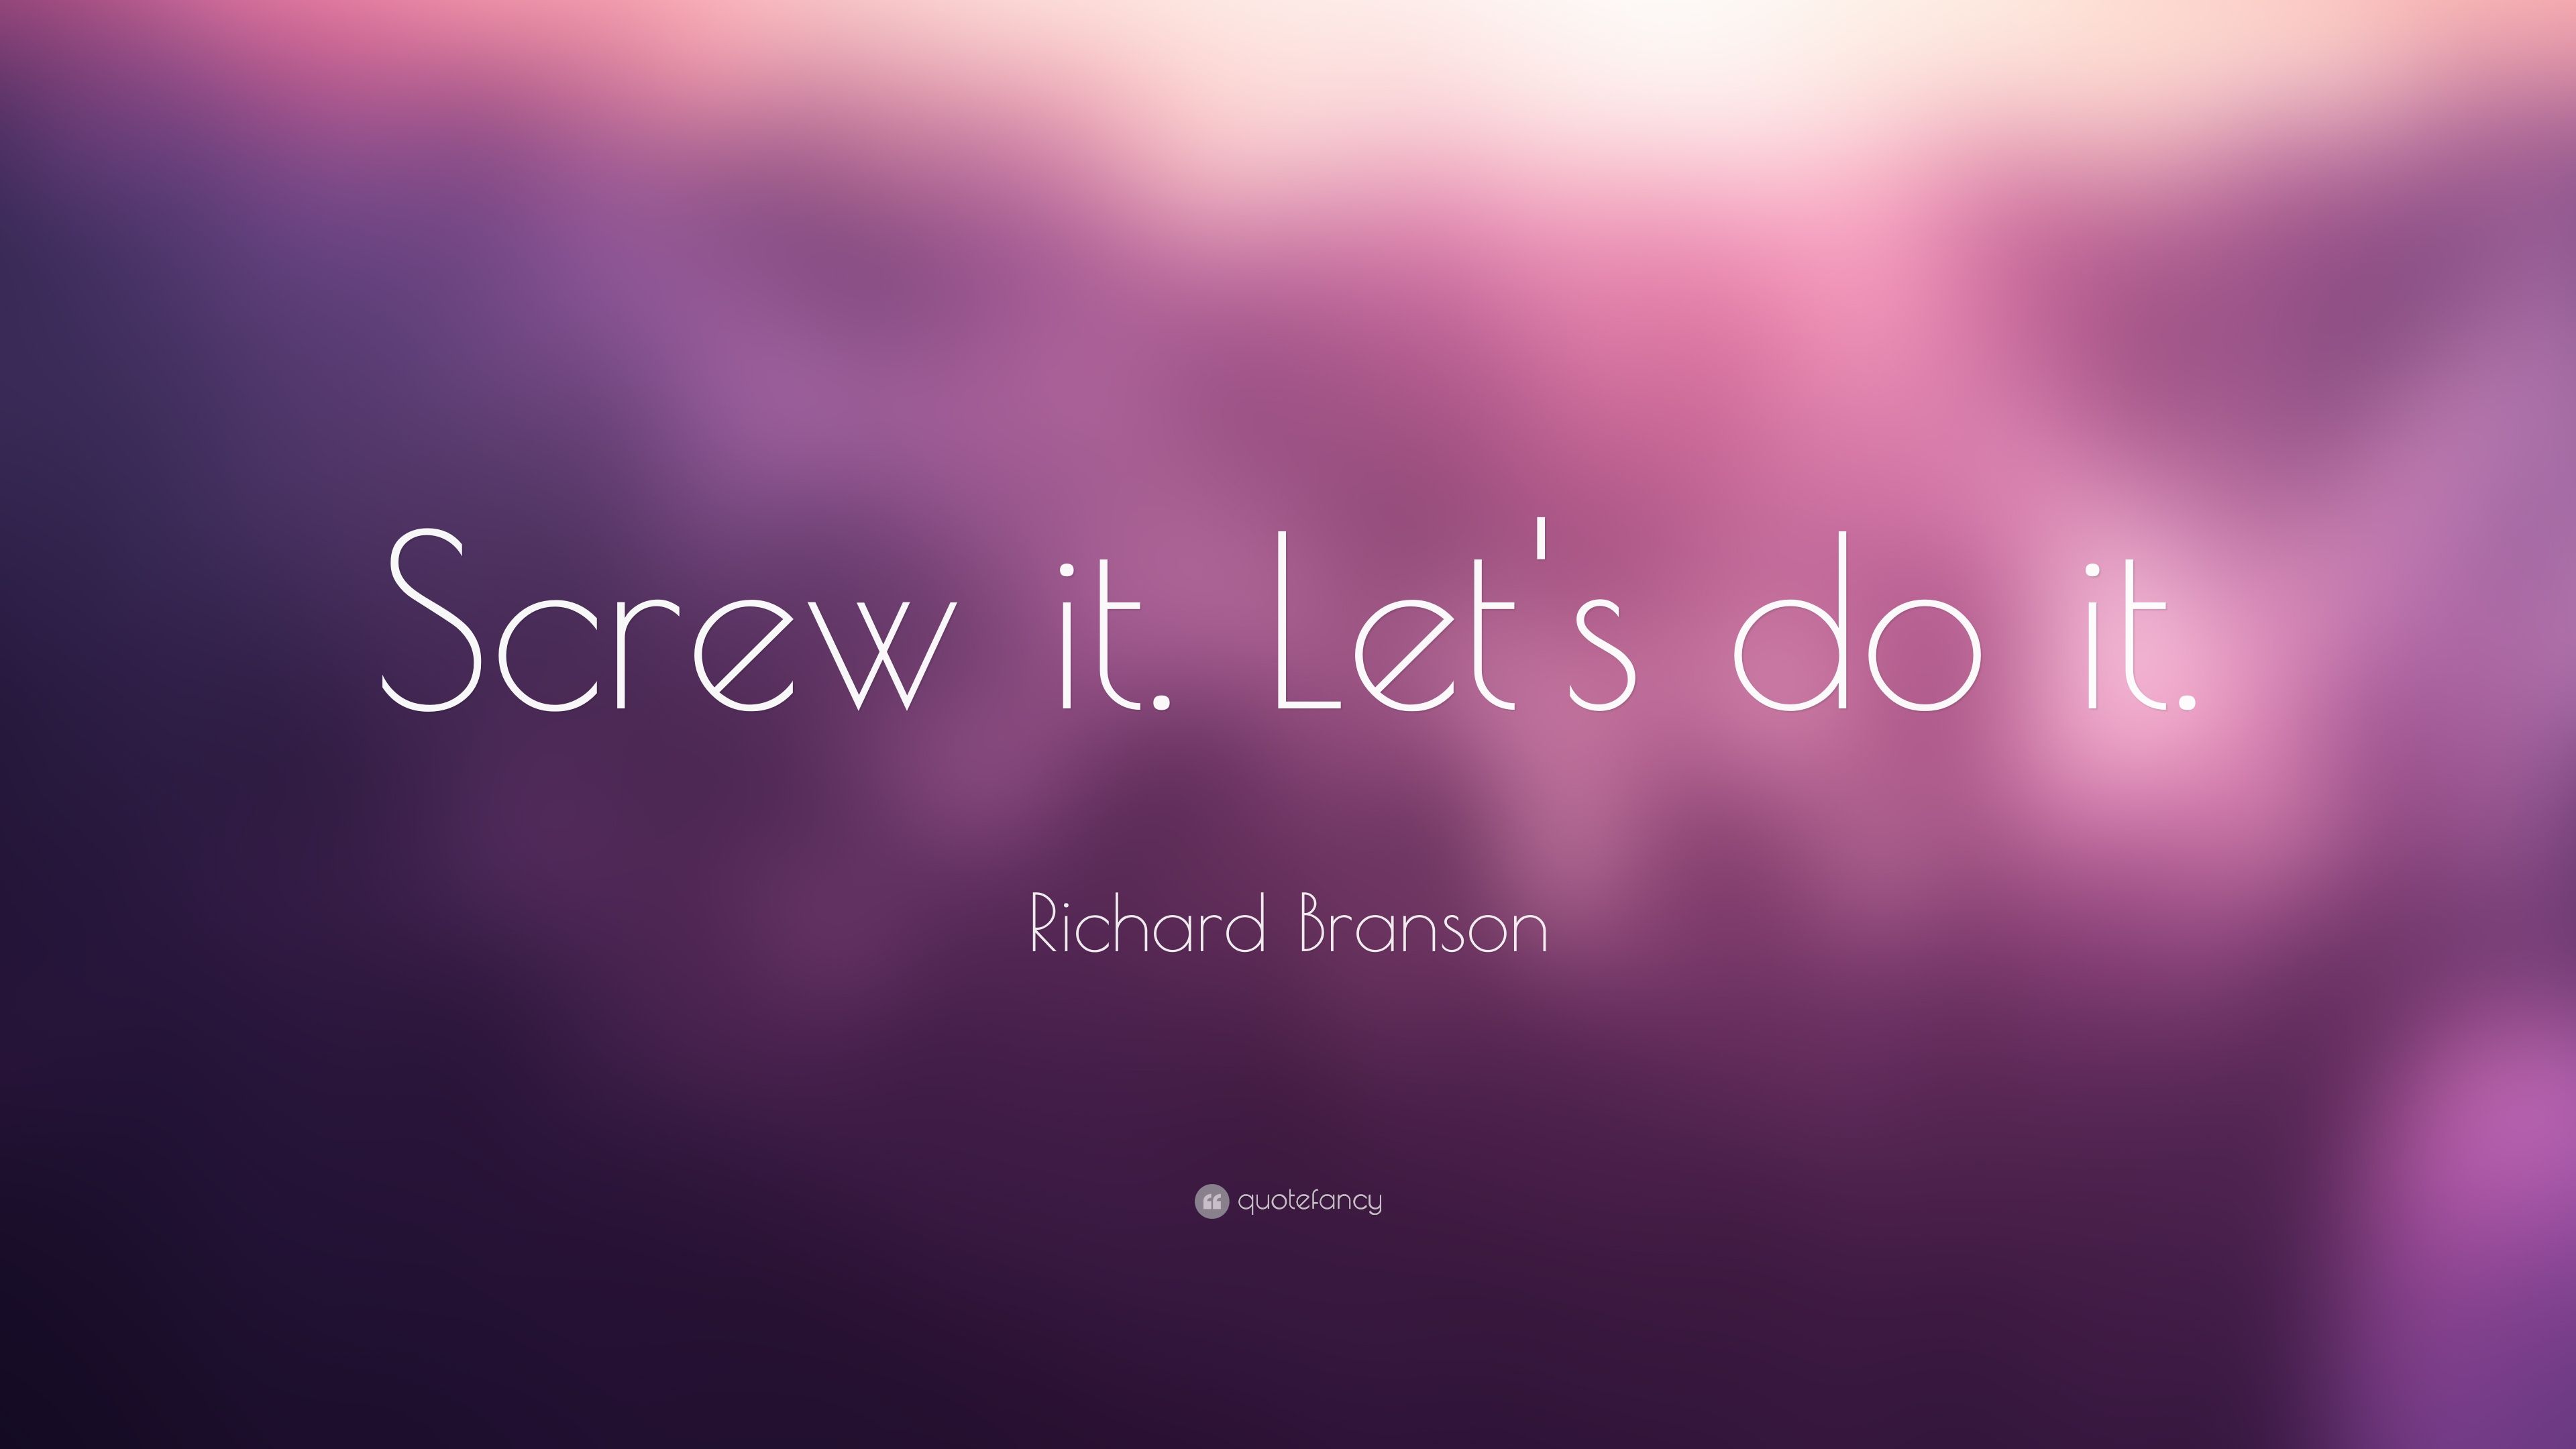 Richard Branson Quote: “Screw it. Let's do it.” (14 wallpapers ...